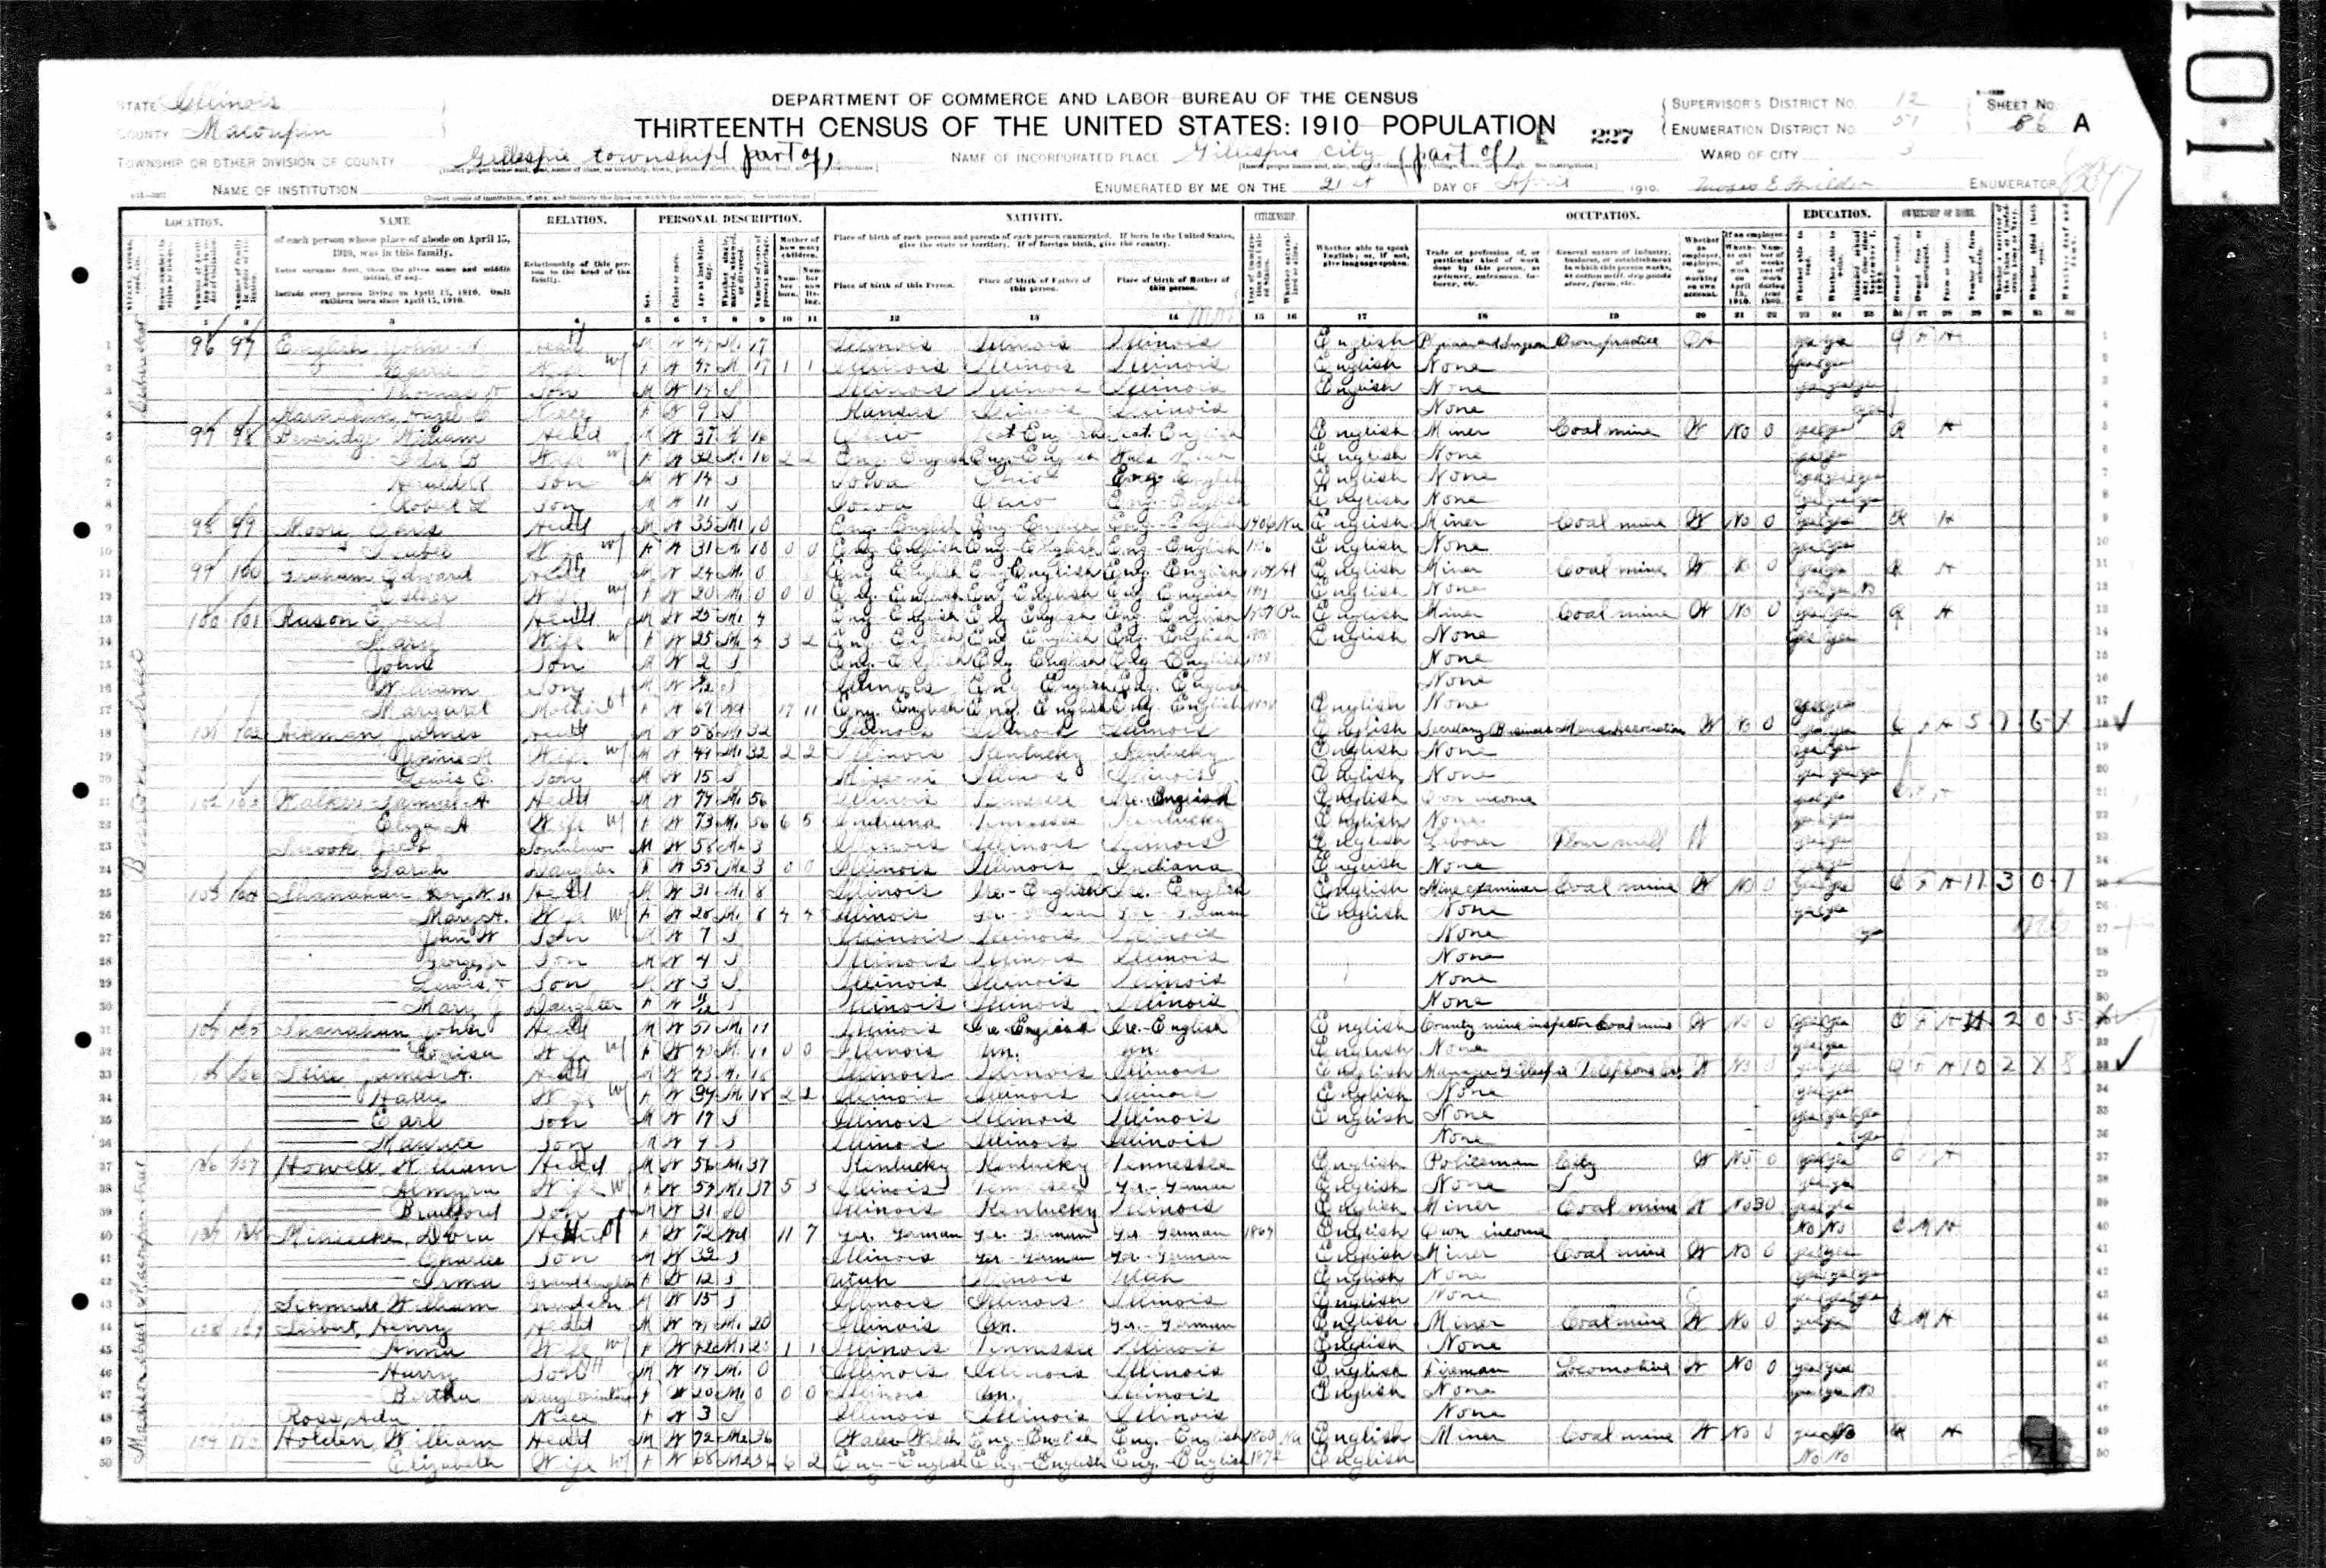 Samuel Walker (possibly son of Jacob and Agnes), 1910 Macoupin County, Illinois, census